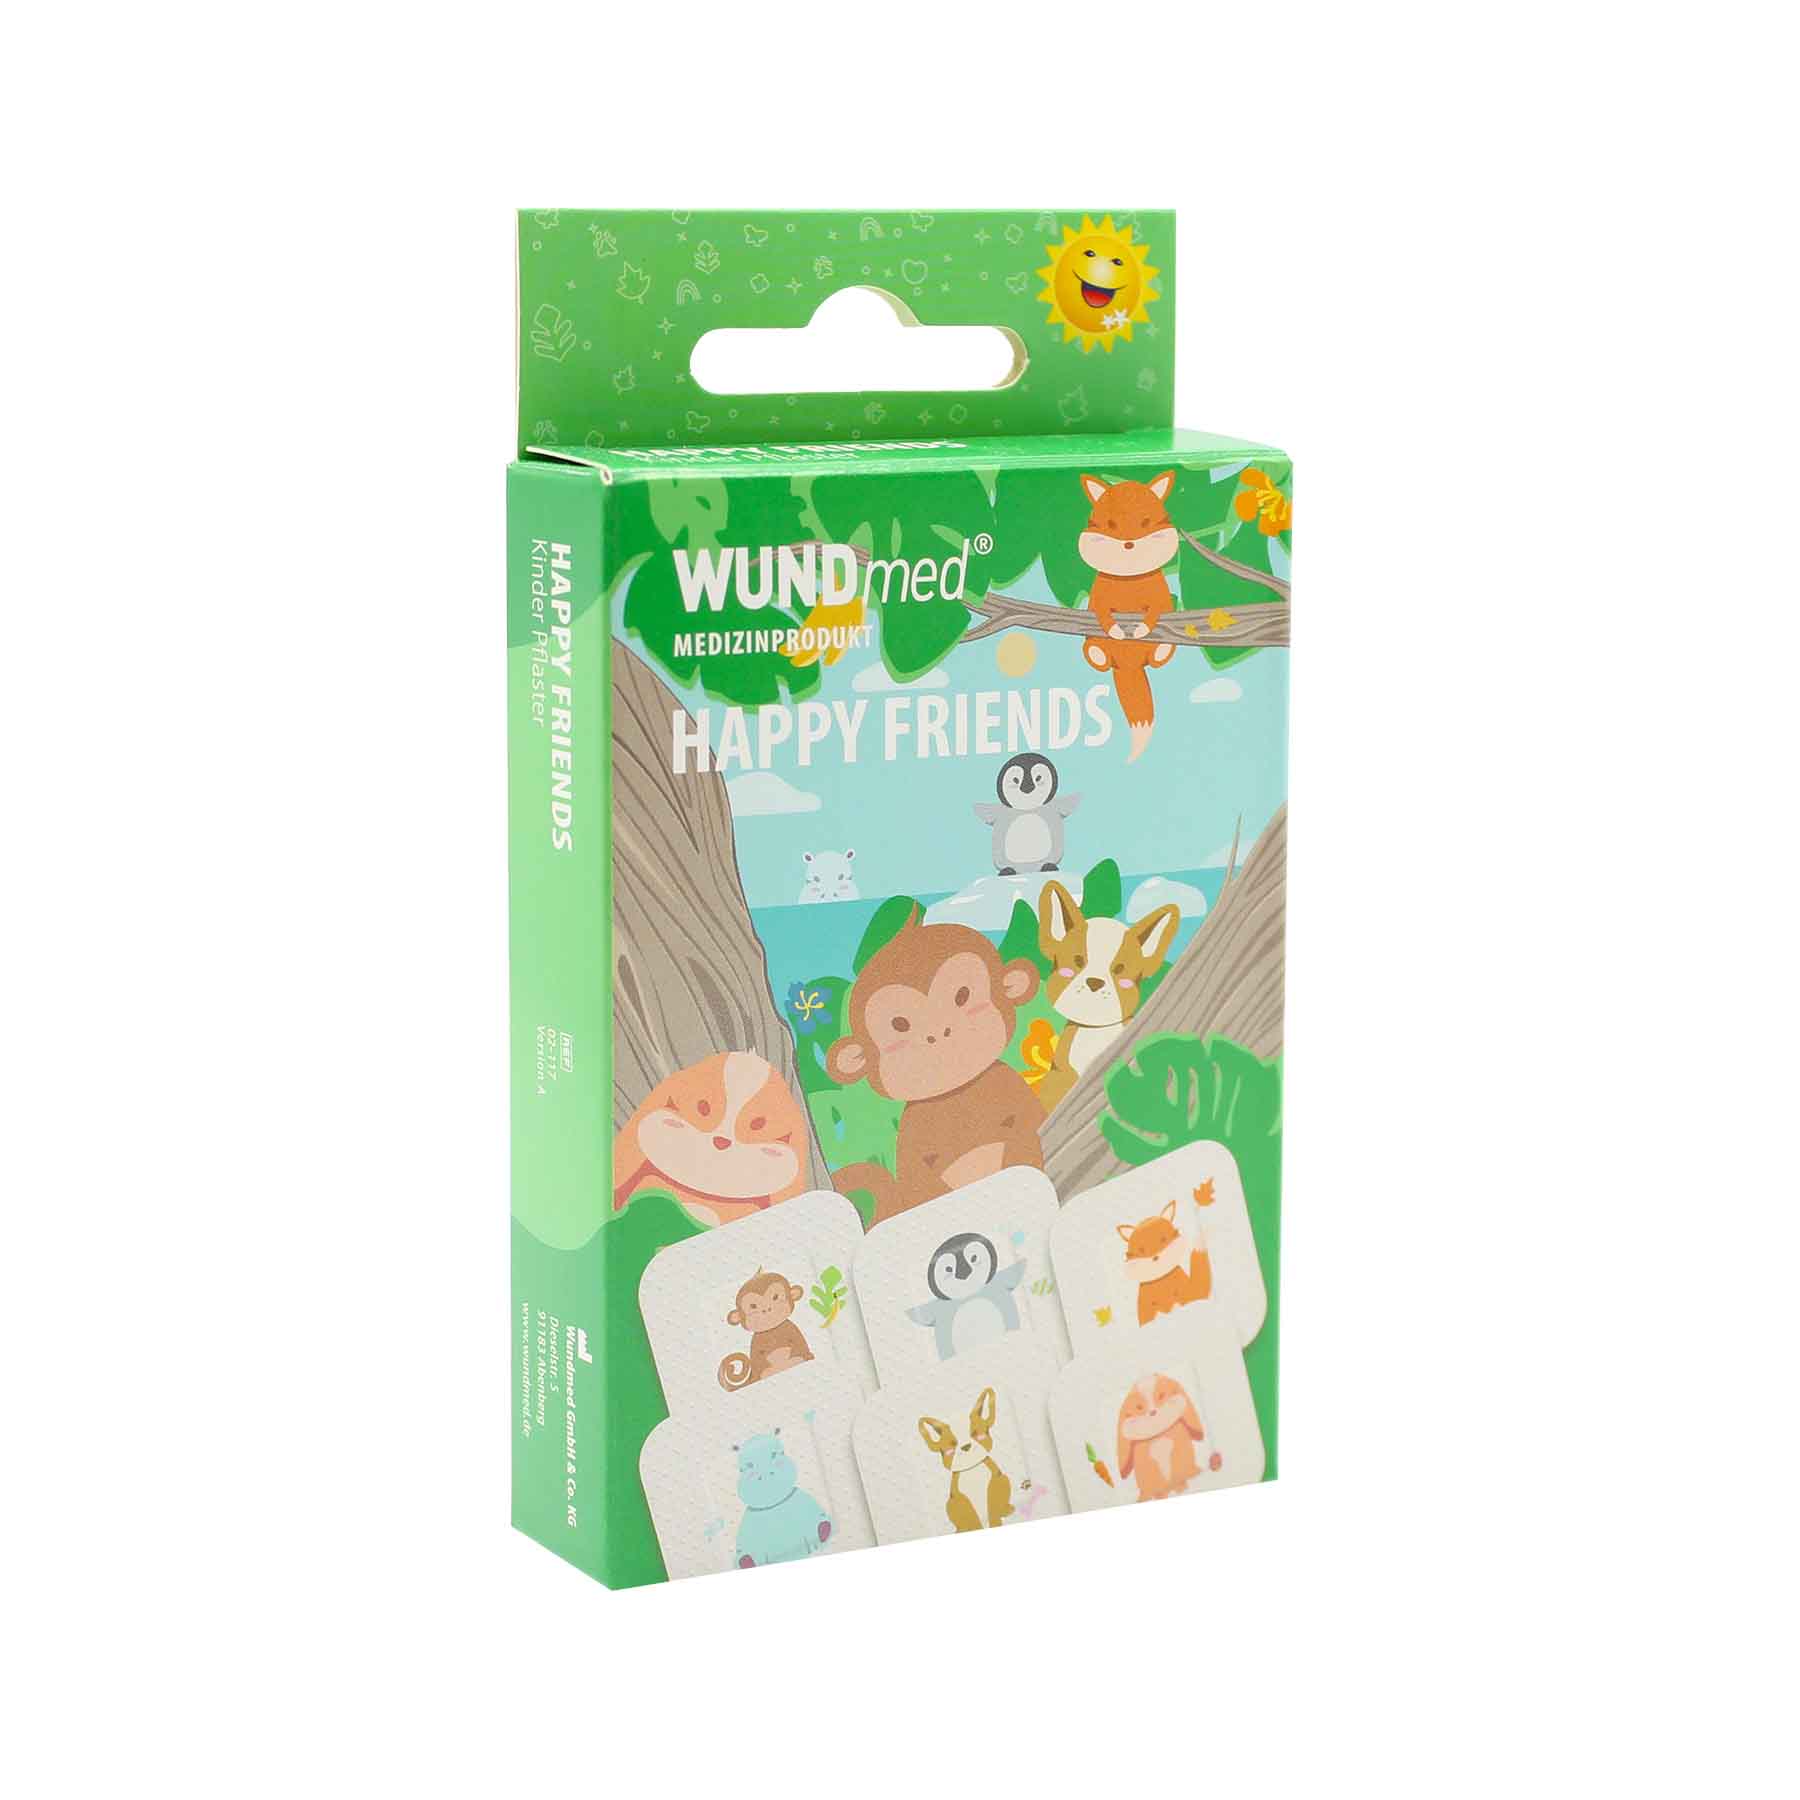 WUNDmed Pflaster "Happy Friends" 10 Stück/Packung